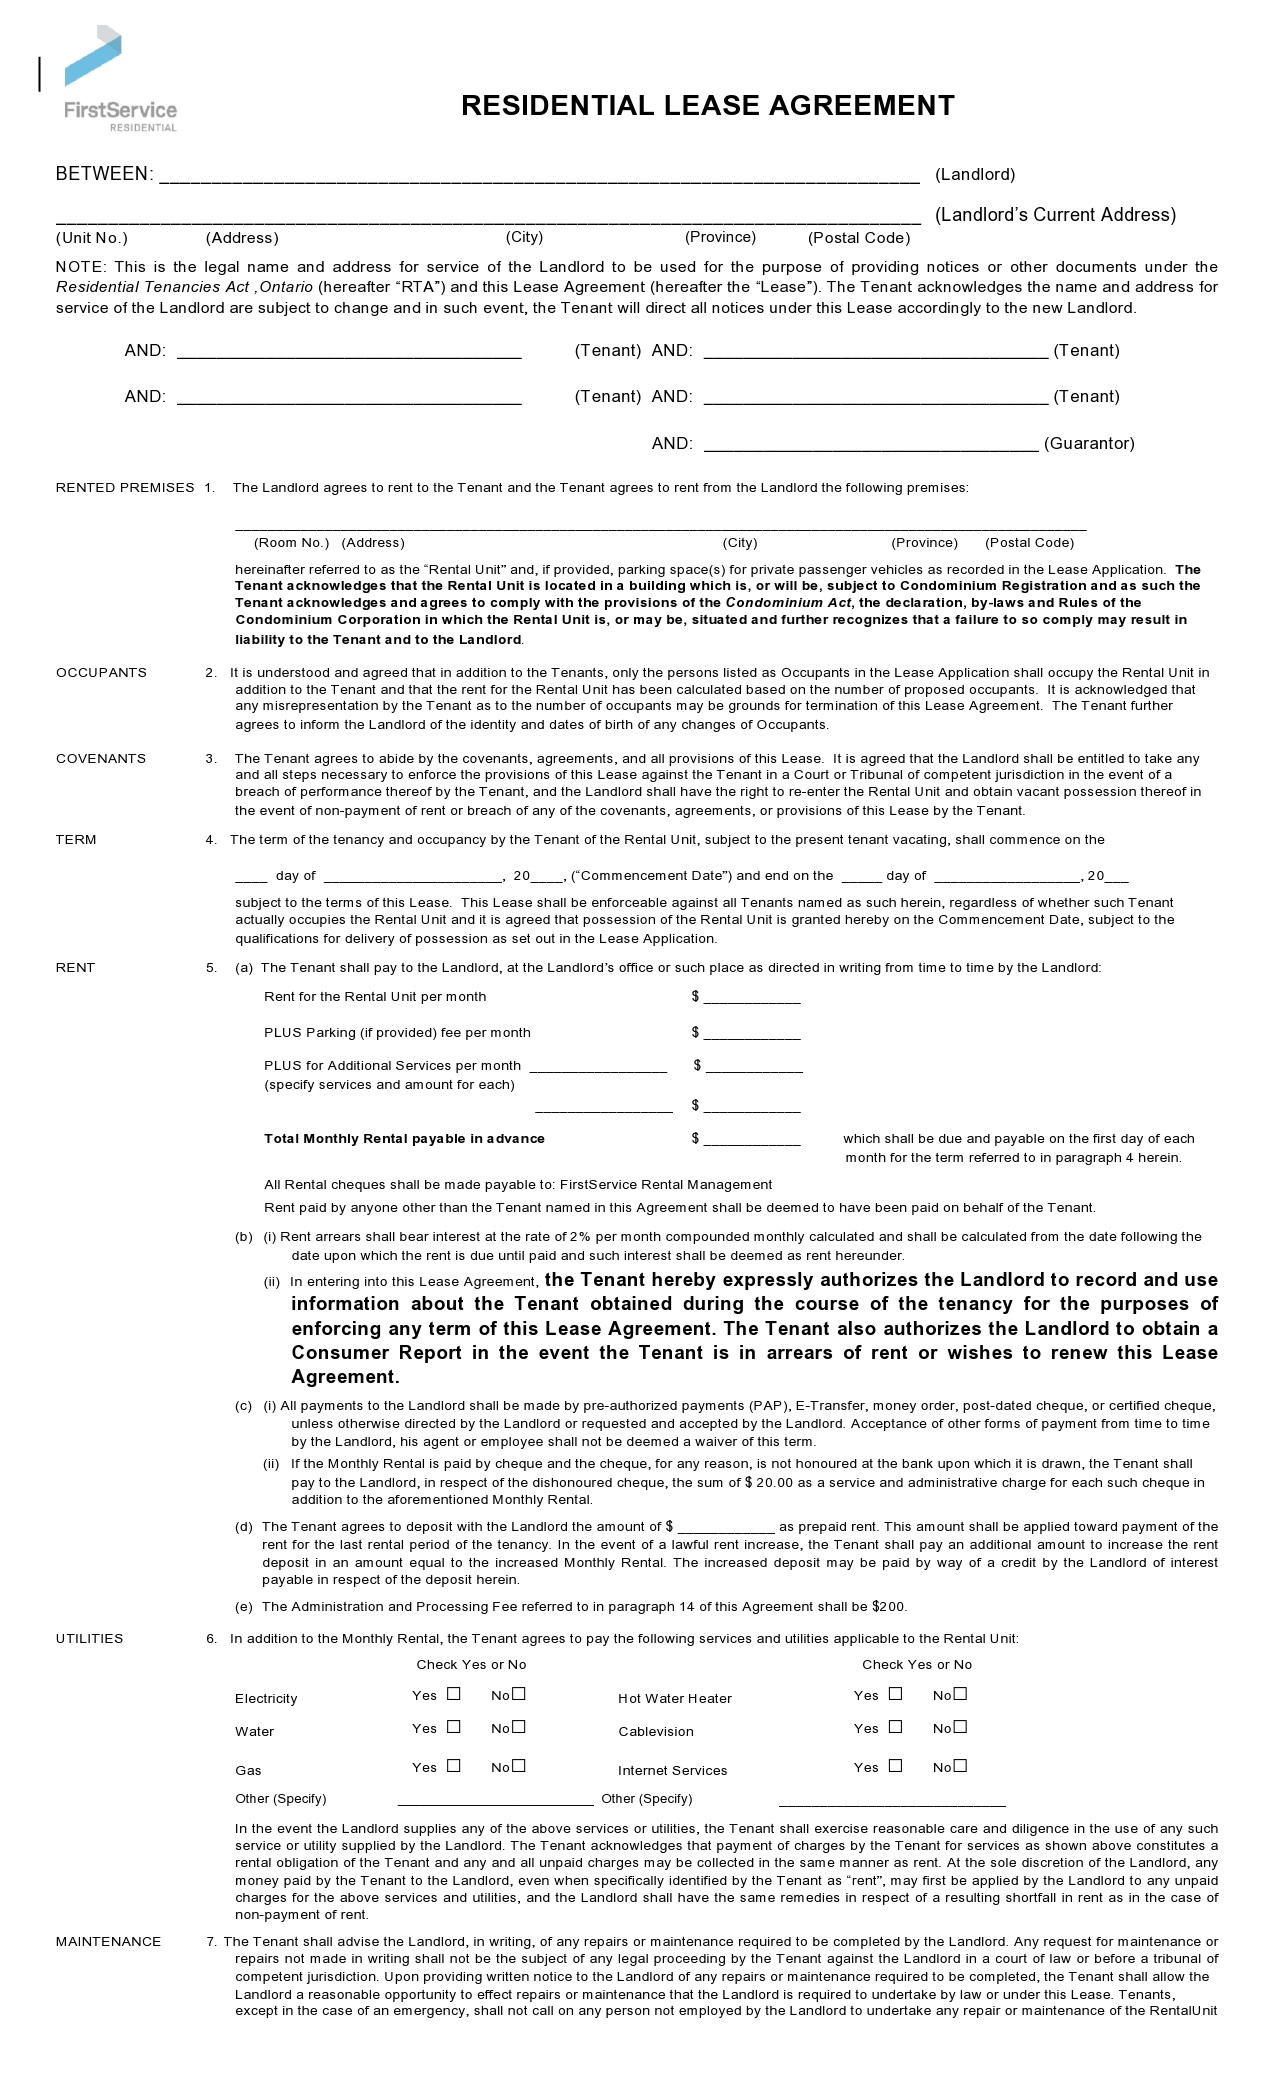 Free residential lease agreement 02